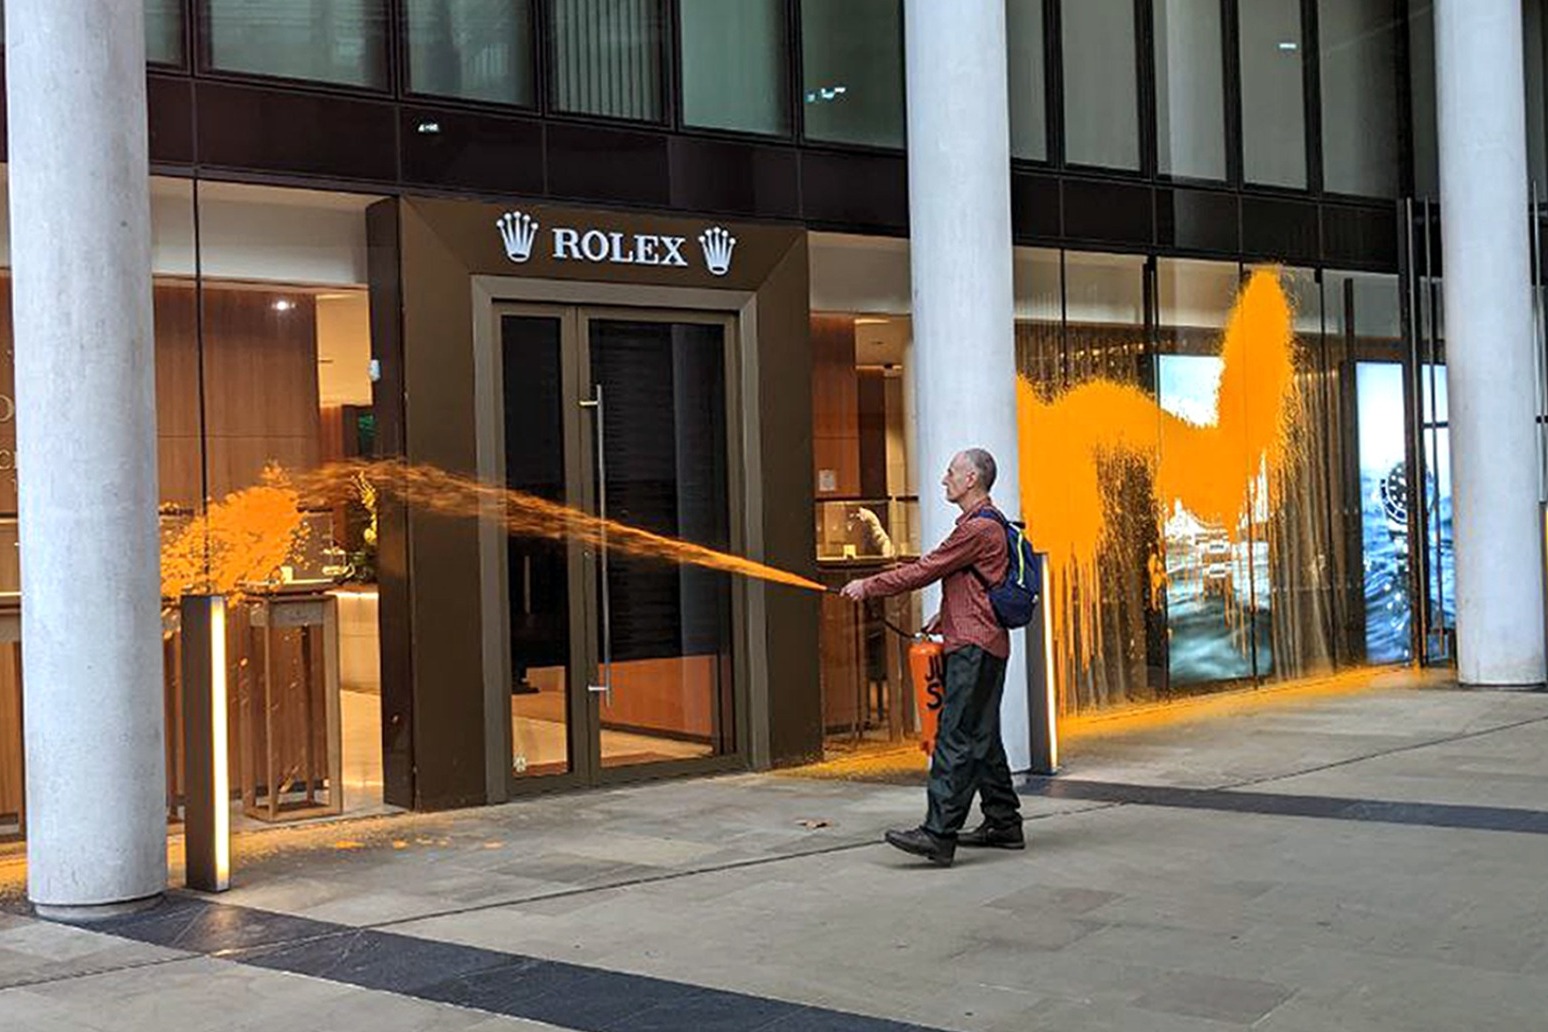 Just Stop Oil activists spray orange paint on Rolex building in central London 